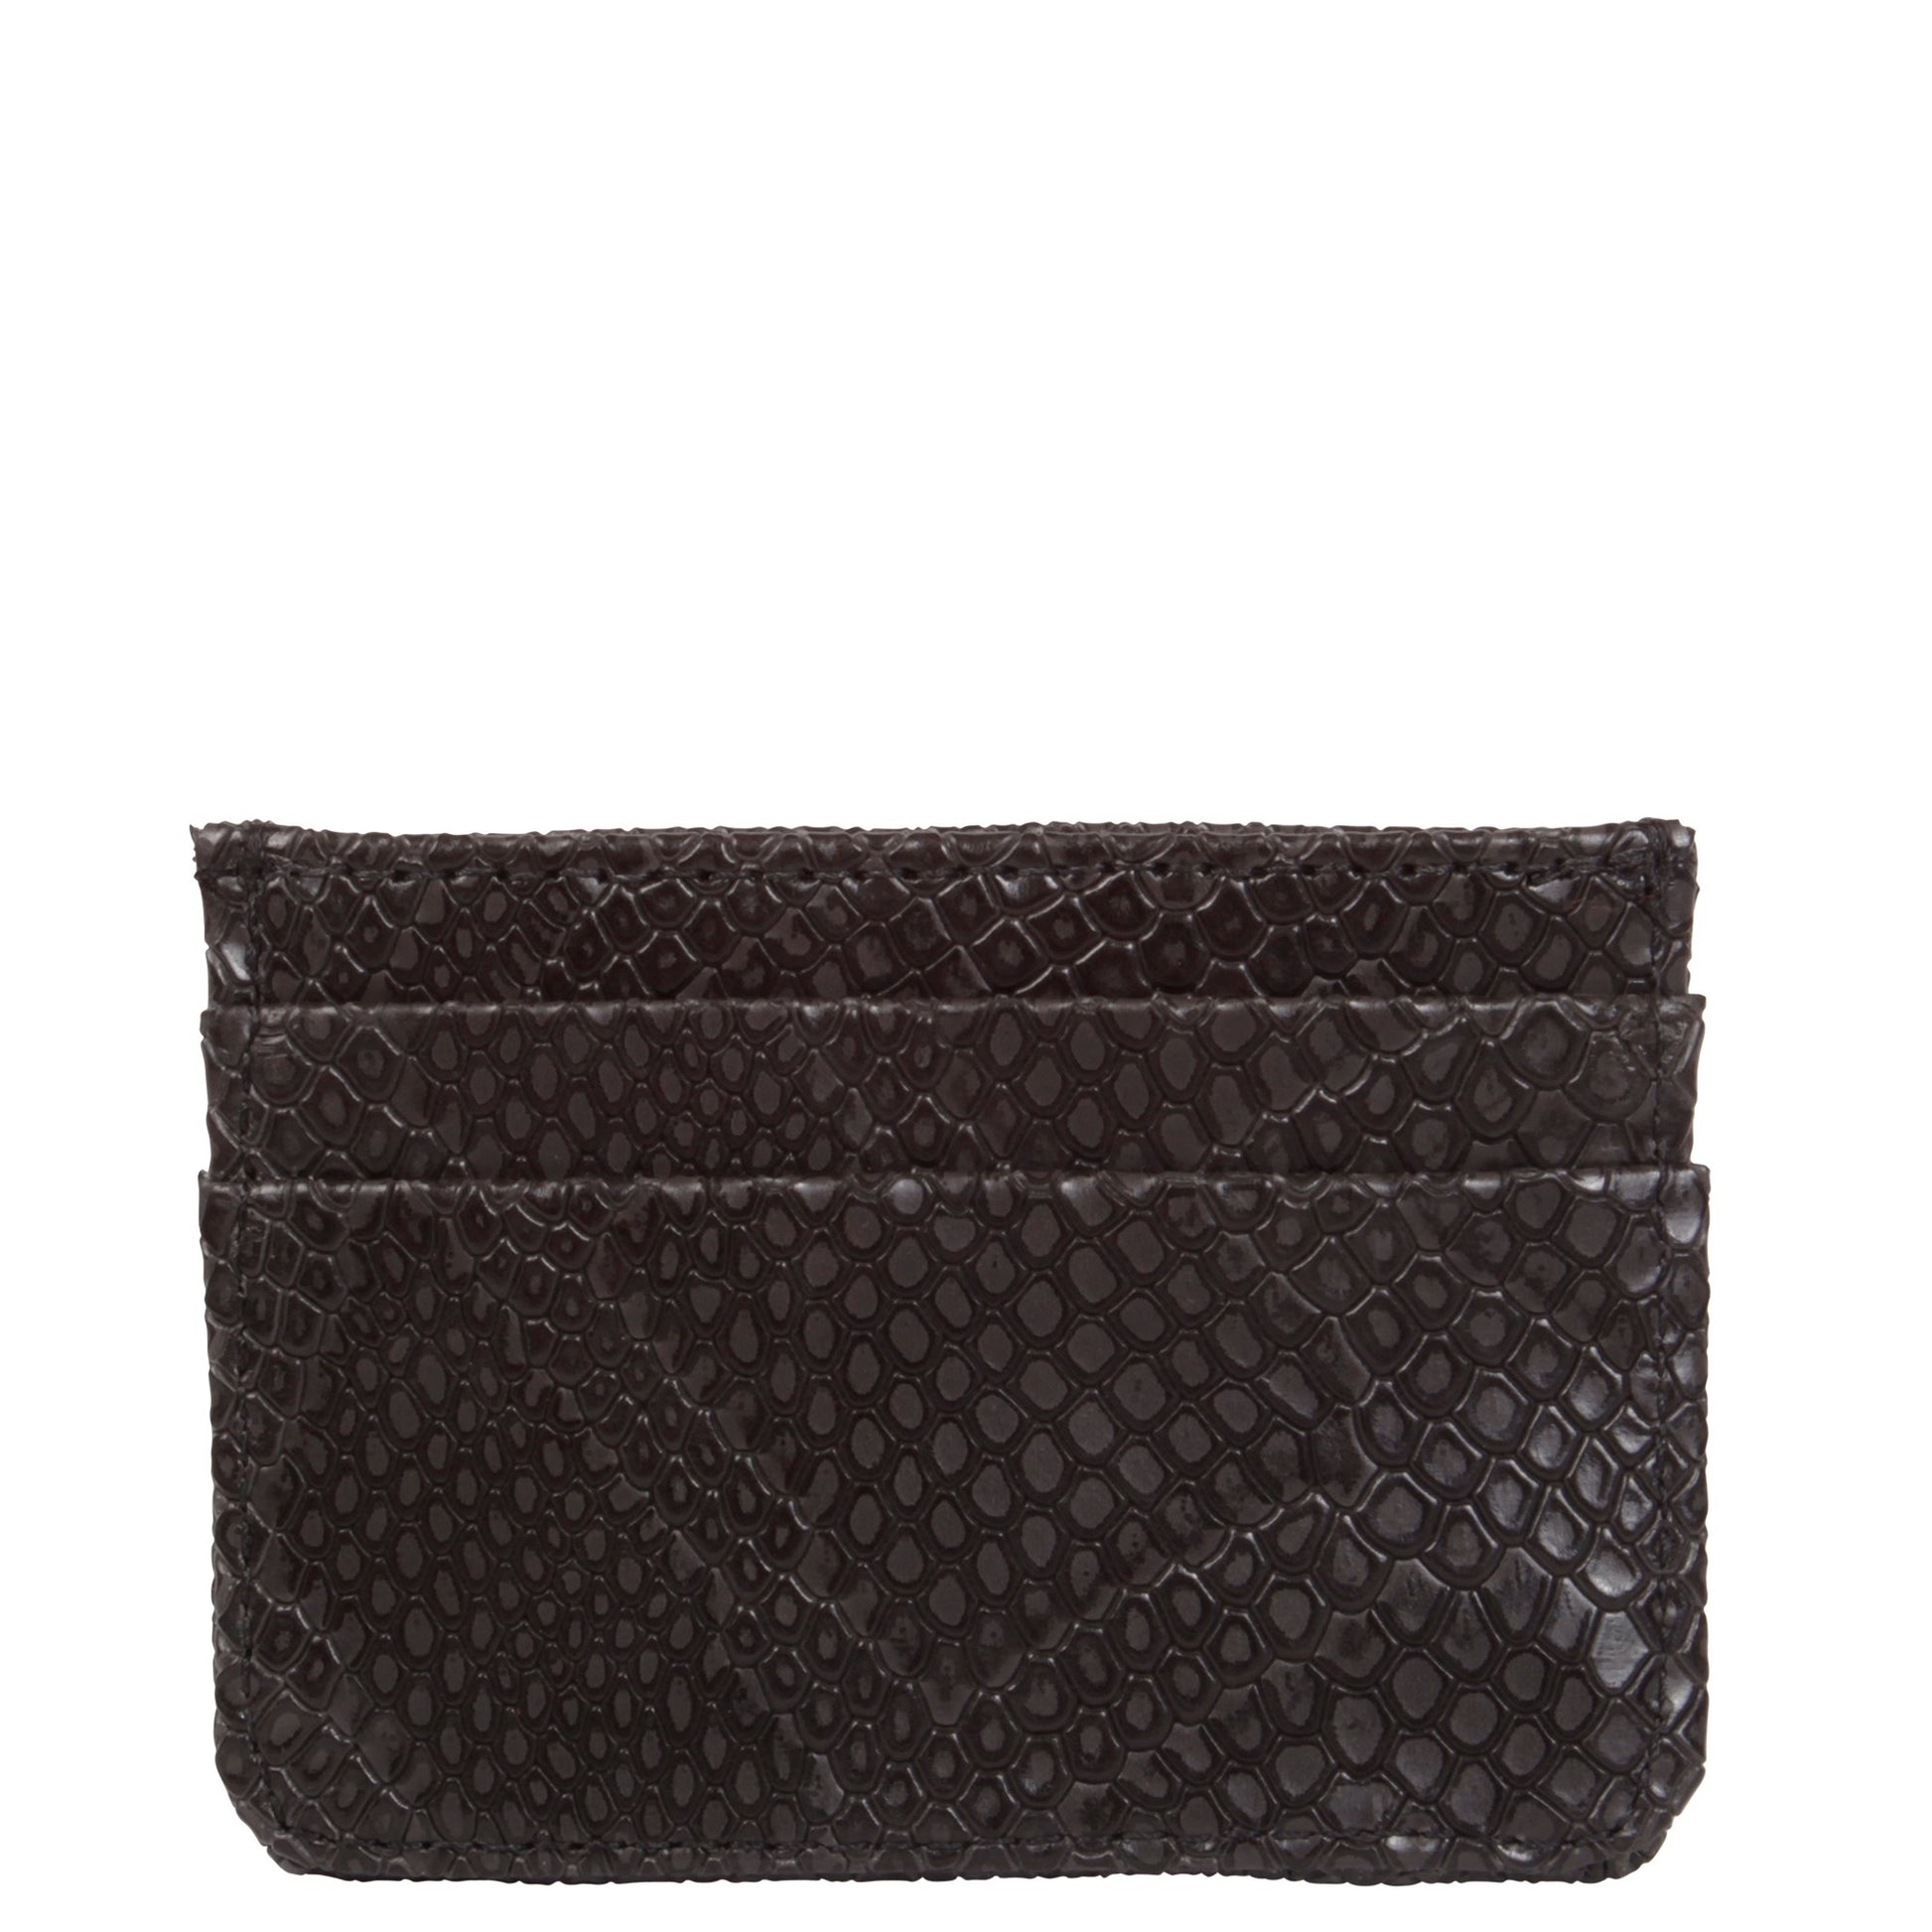 C.A.L.V.I.N K.L.E.I.N French Clutch Folded Wallet Faux Leather